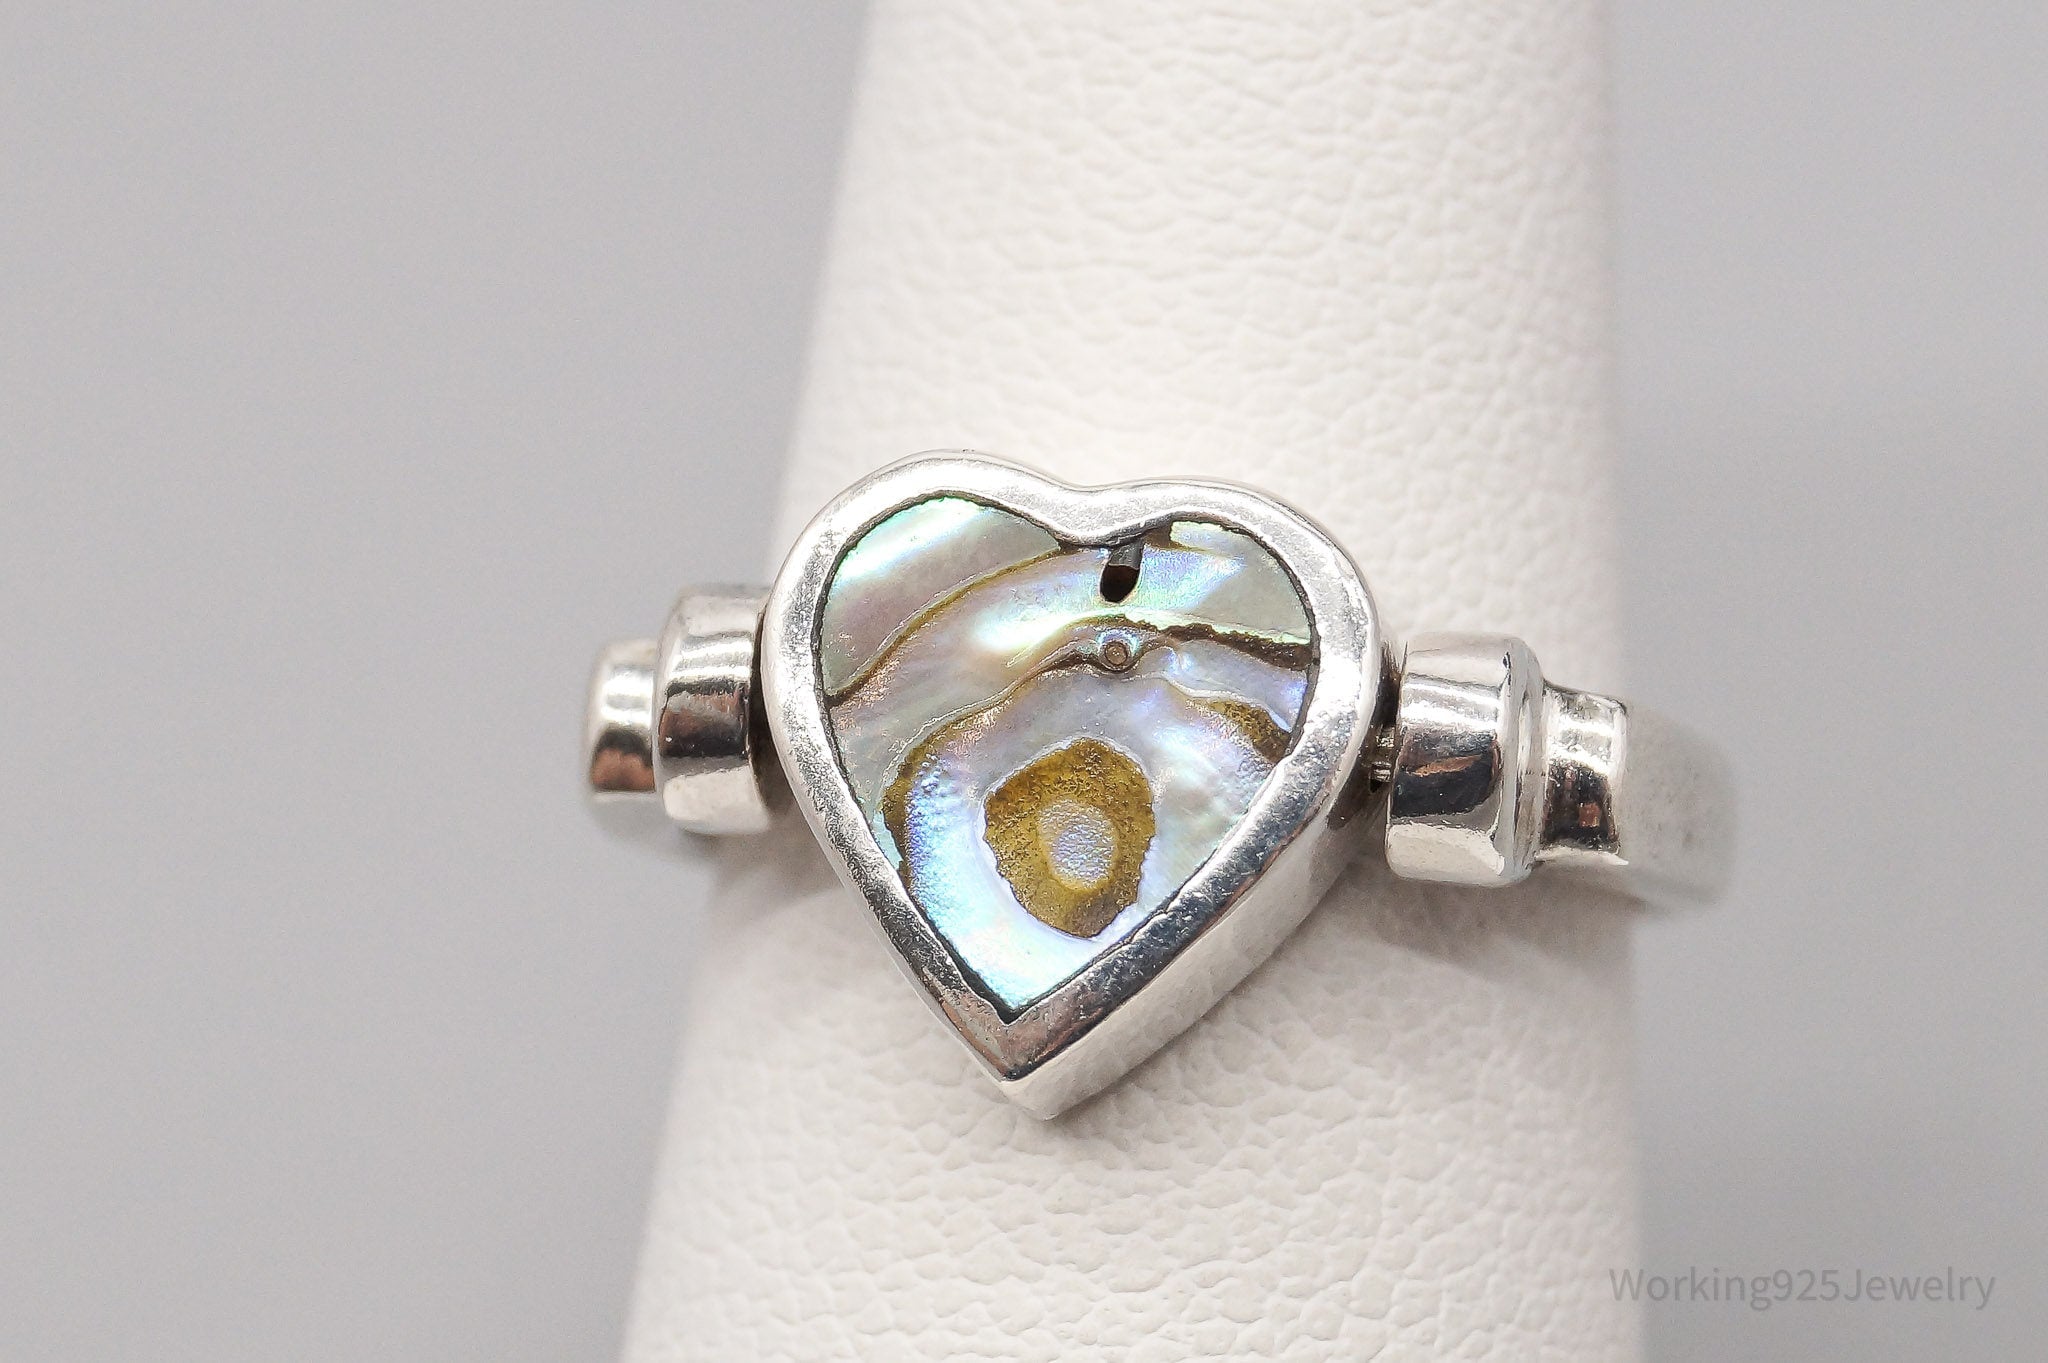 Vintage Spinning Paua Abalone Shell Heart Sterling Silver Ring - Size 5.75